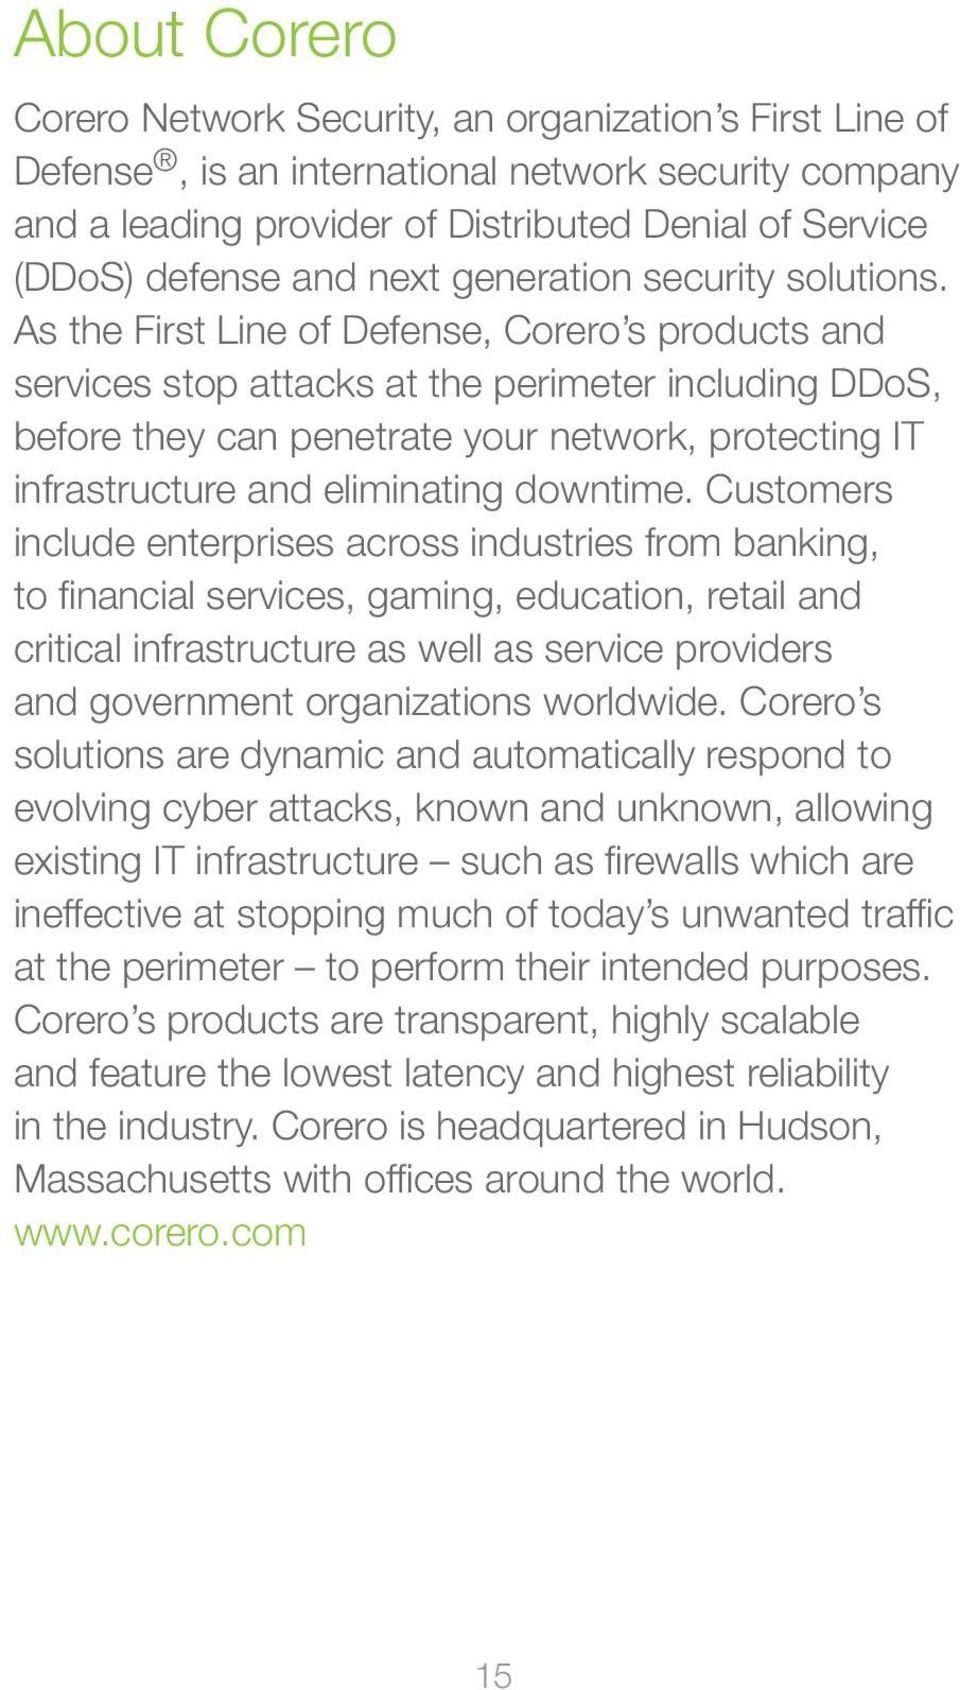 As the First Line of Defense, Corero s products and services stop attacks at the perimeter including DDoS, before they can penetrate your network, protecting IT infrastructure and eliminating